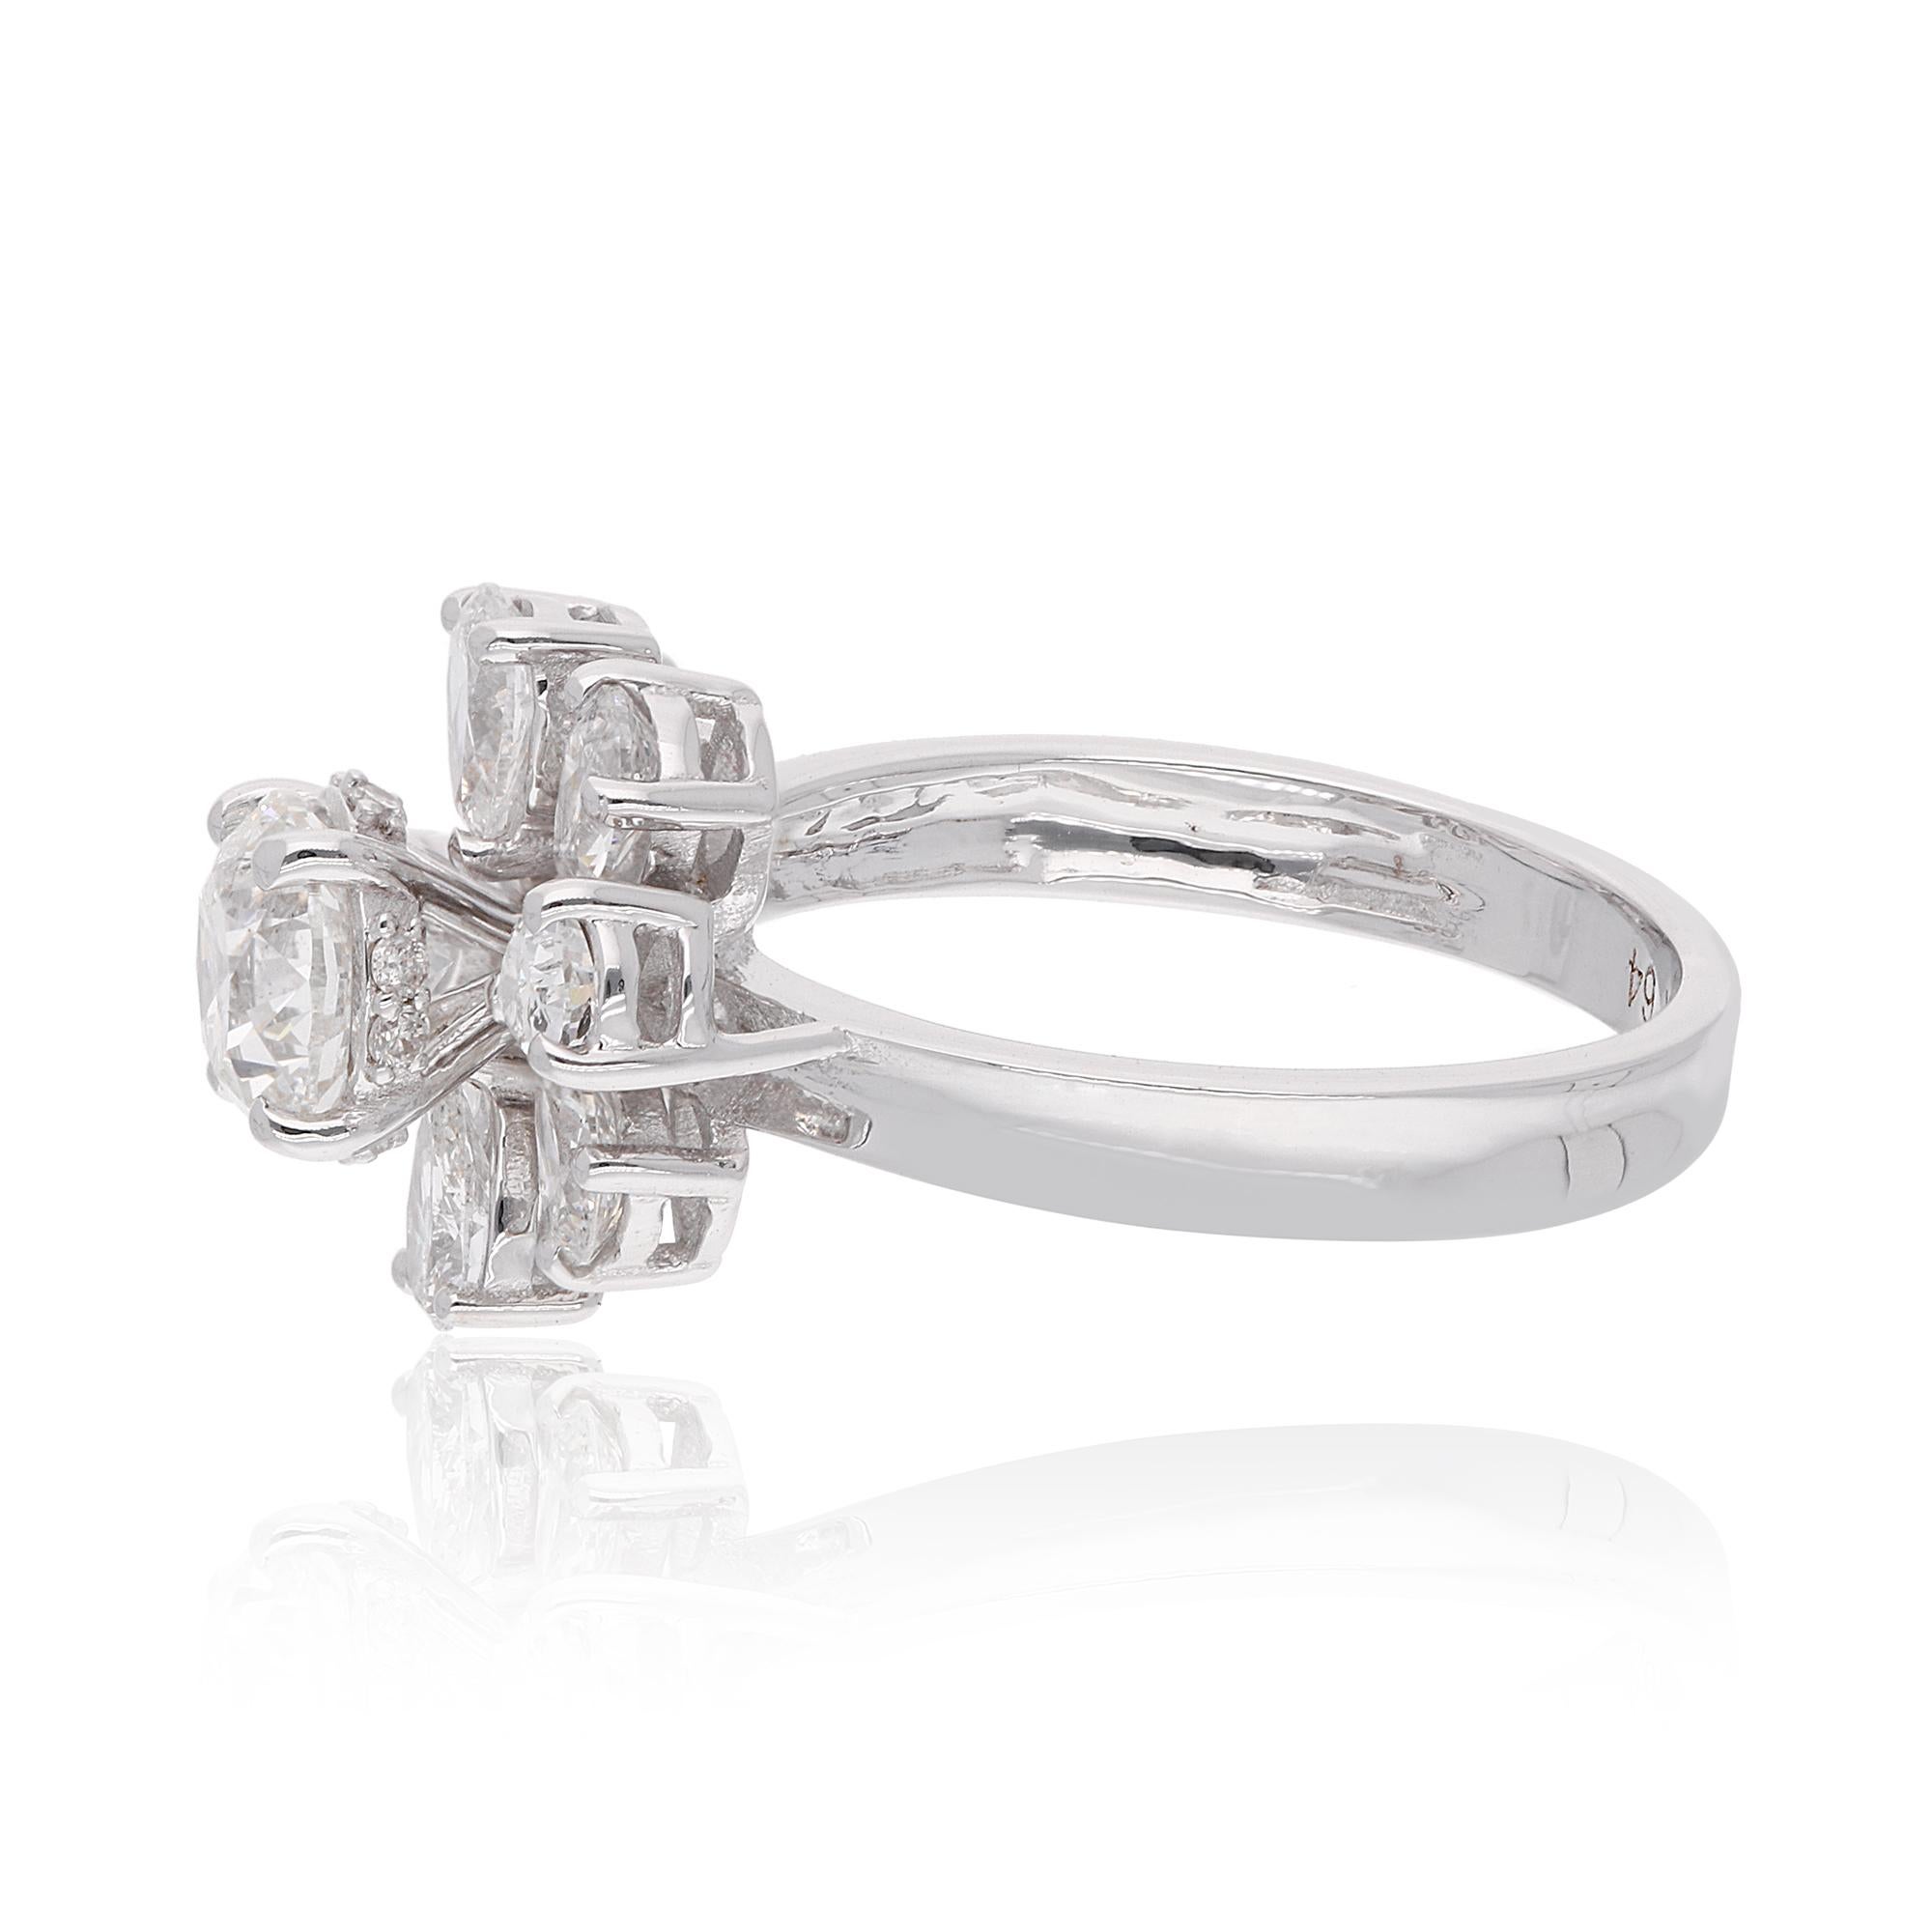 For Sale:  SI Clarity HI Color Solitaire Round Diamond Cluster Ring 18 Karat White Gold 2